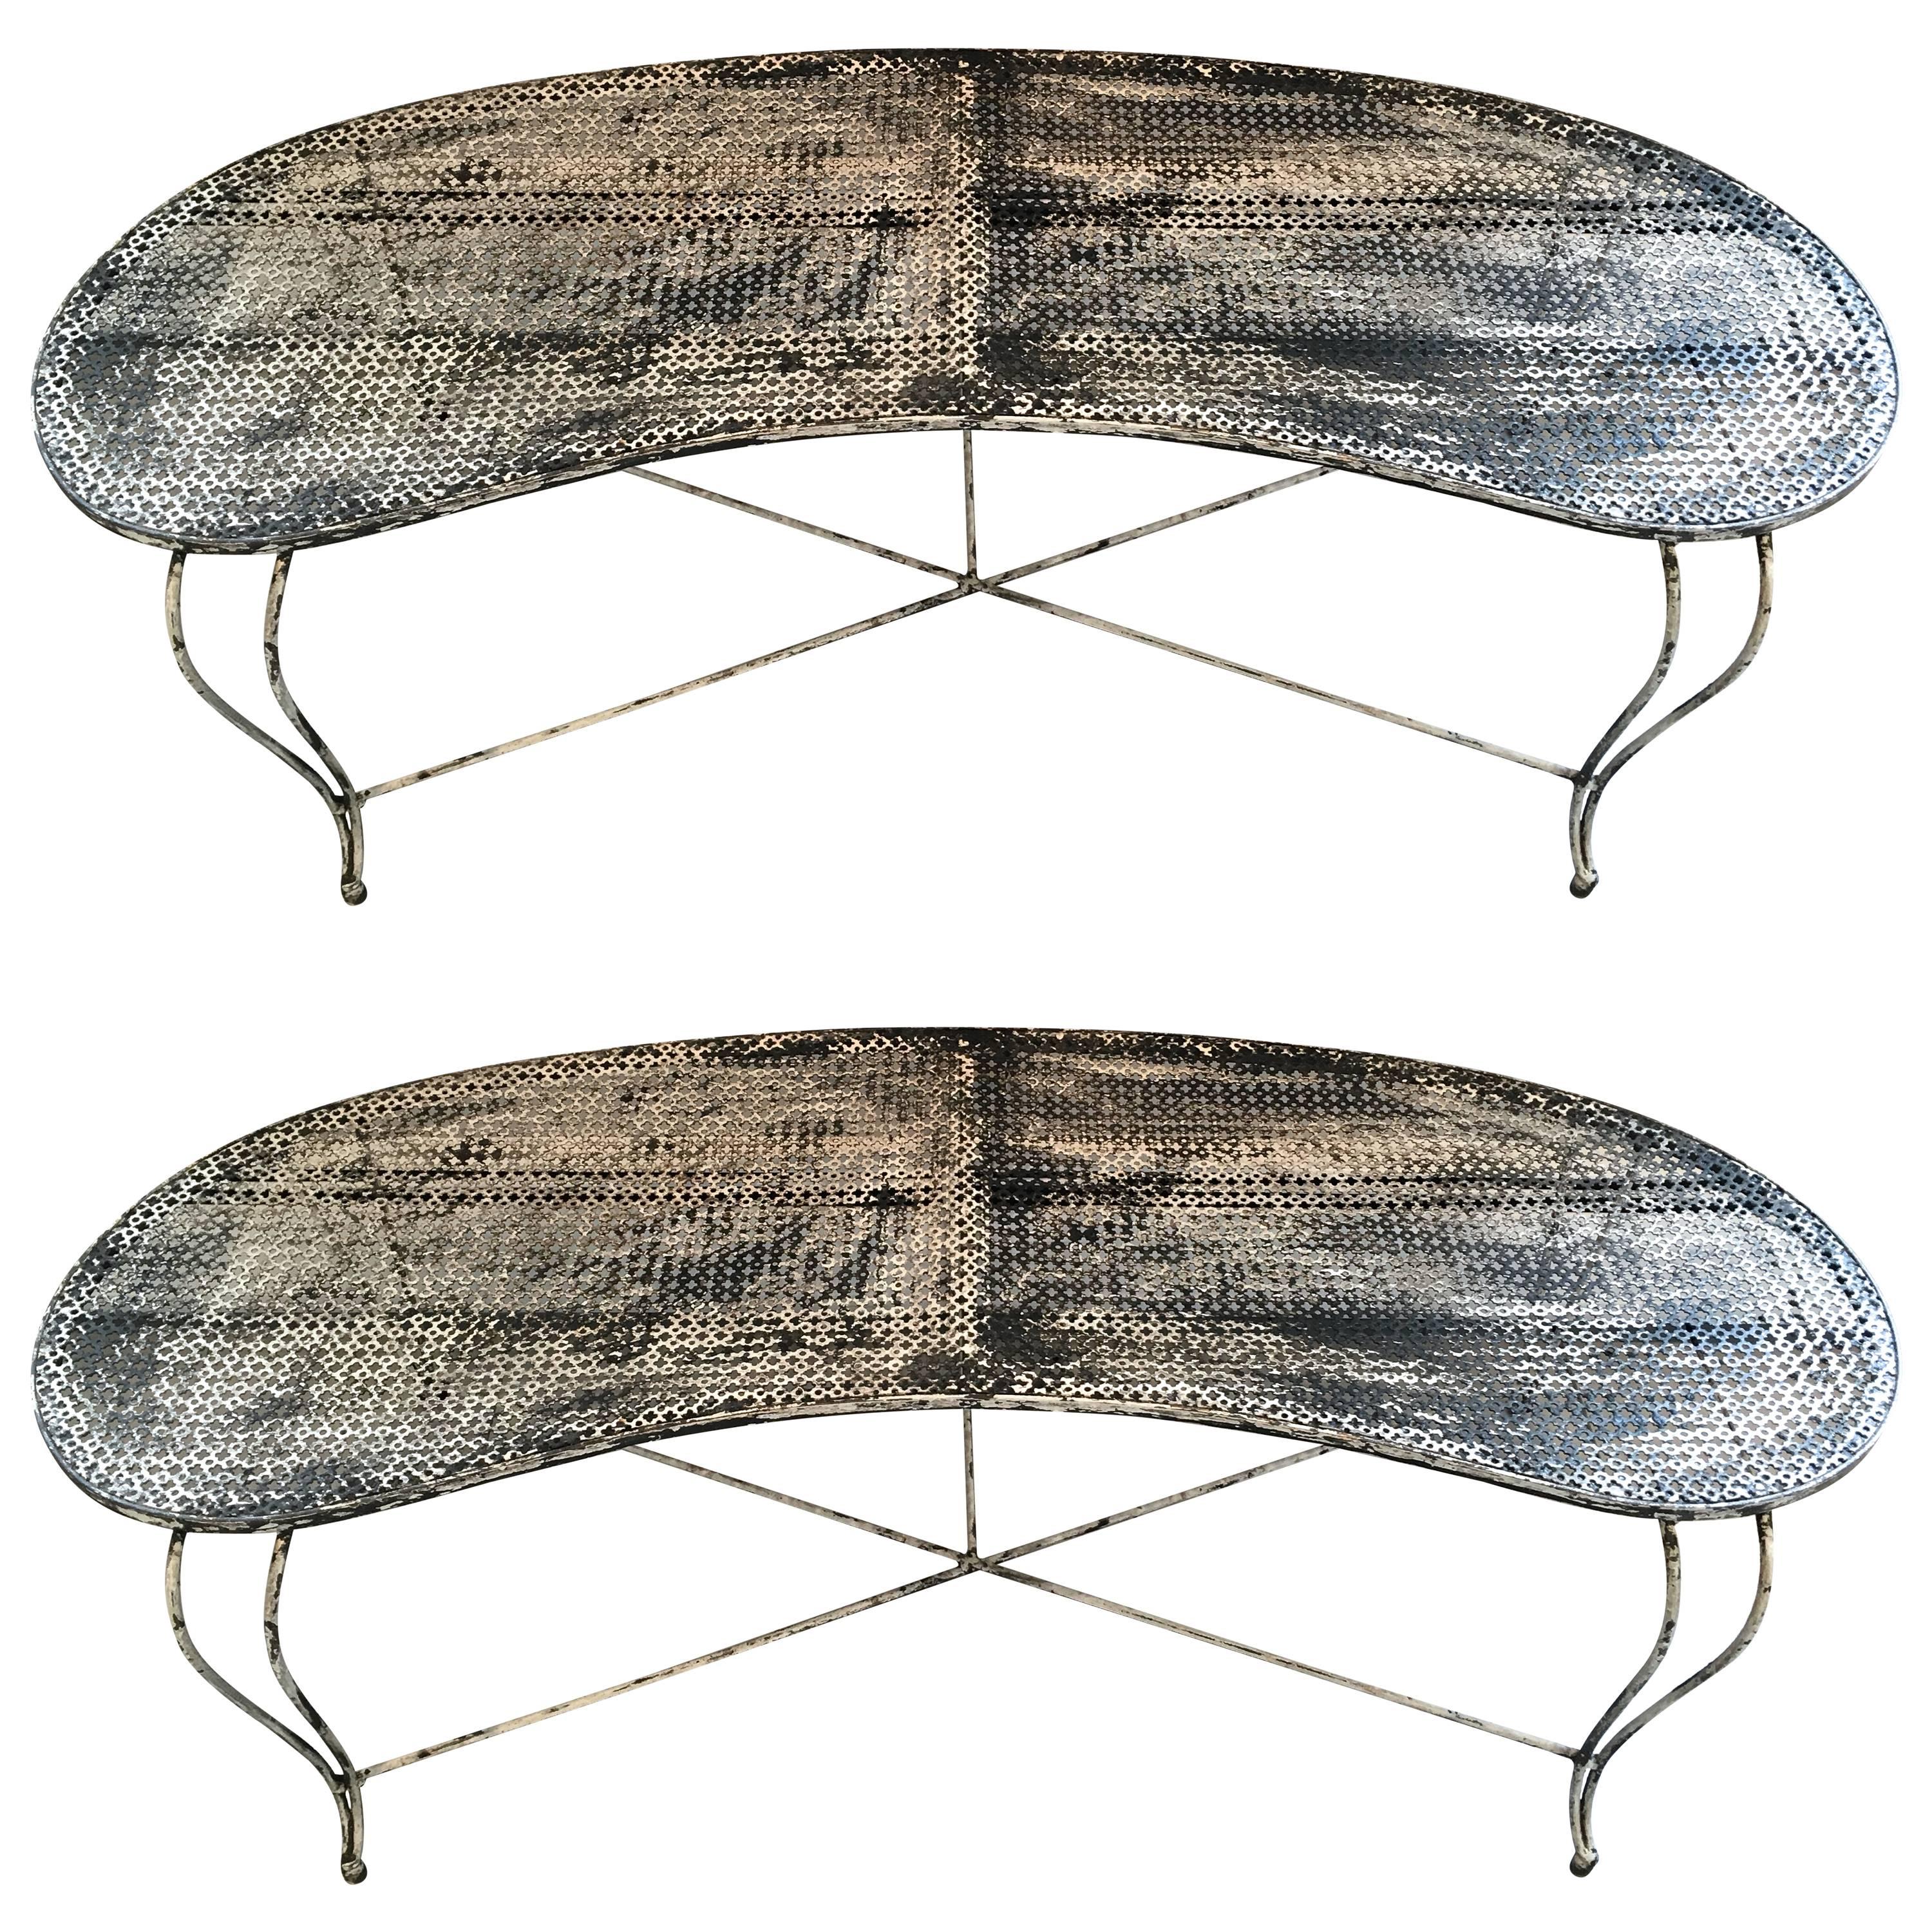 Two Pairs of Mid-Century Modern Curved Steel Benches